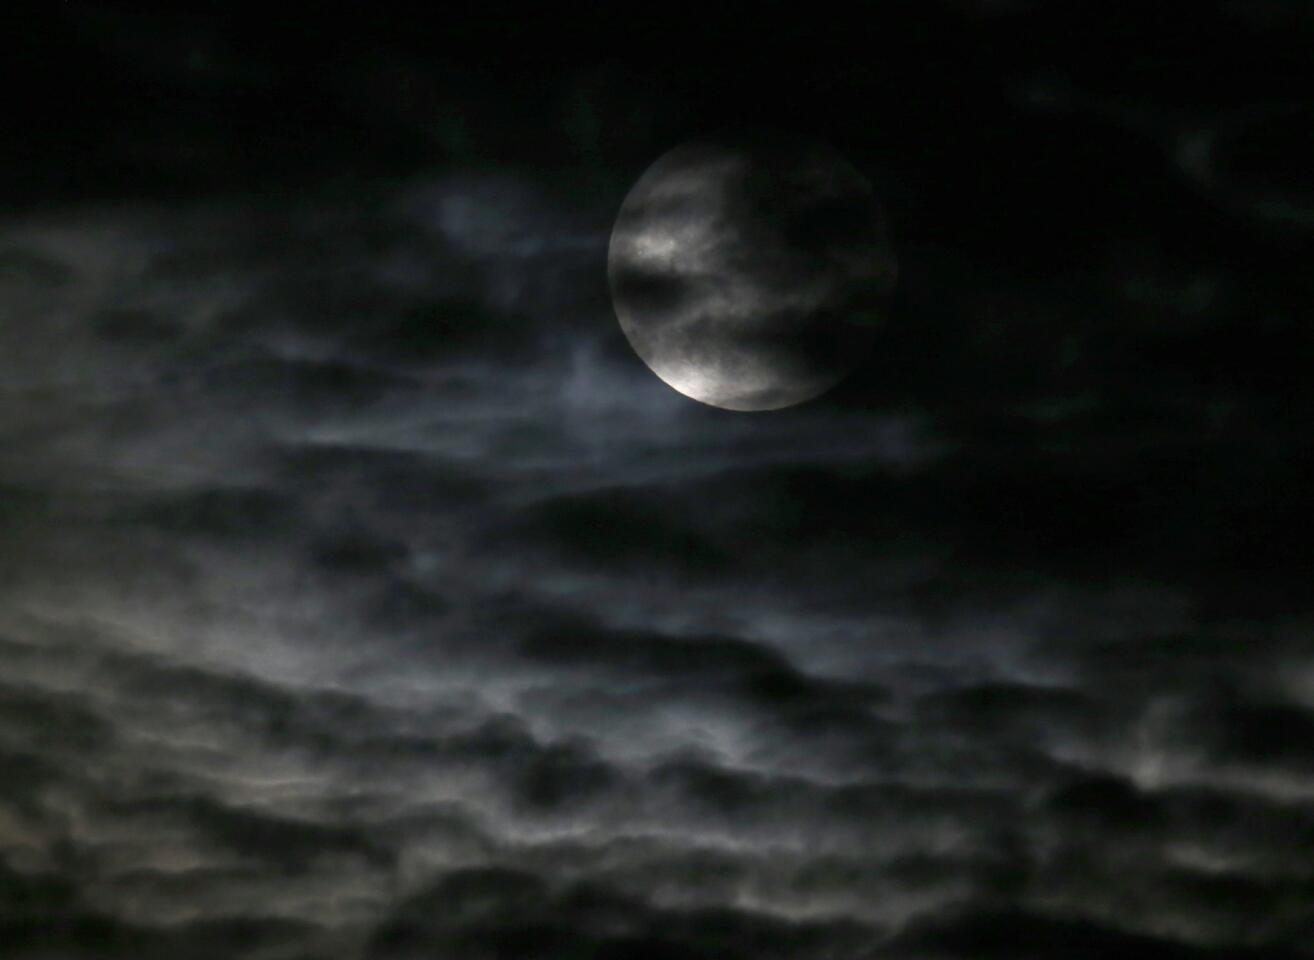 Clouds obscure the so-called supermoon before a lunar eclipse Sunday, Sept. 27, 2015, in Chicago.